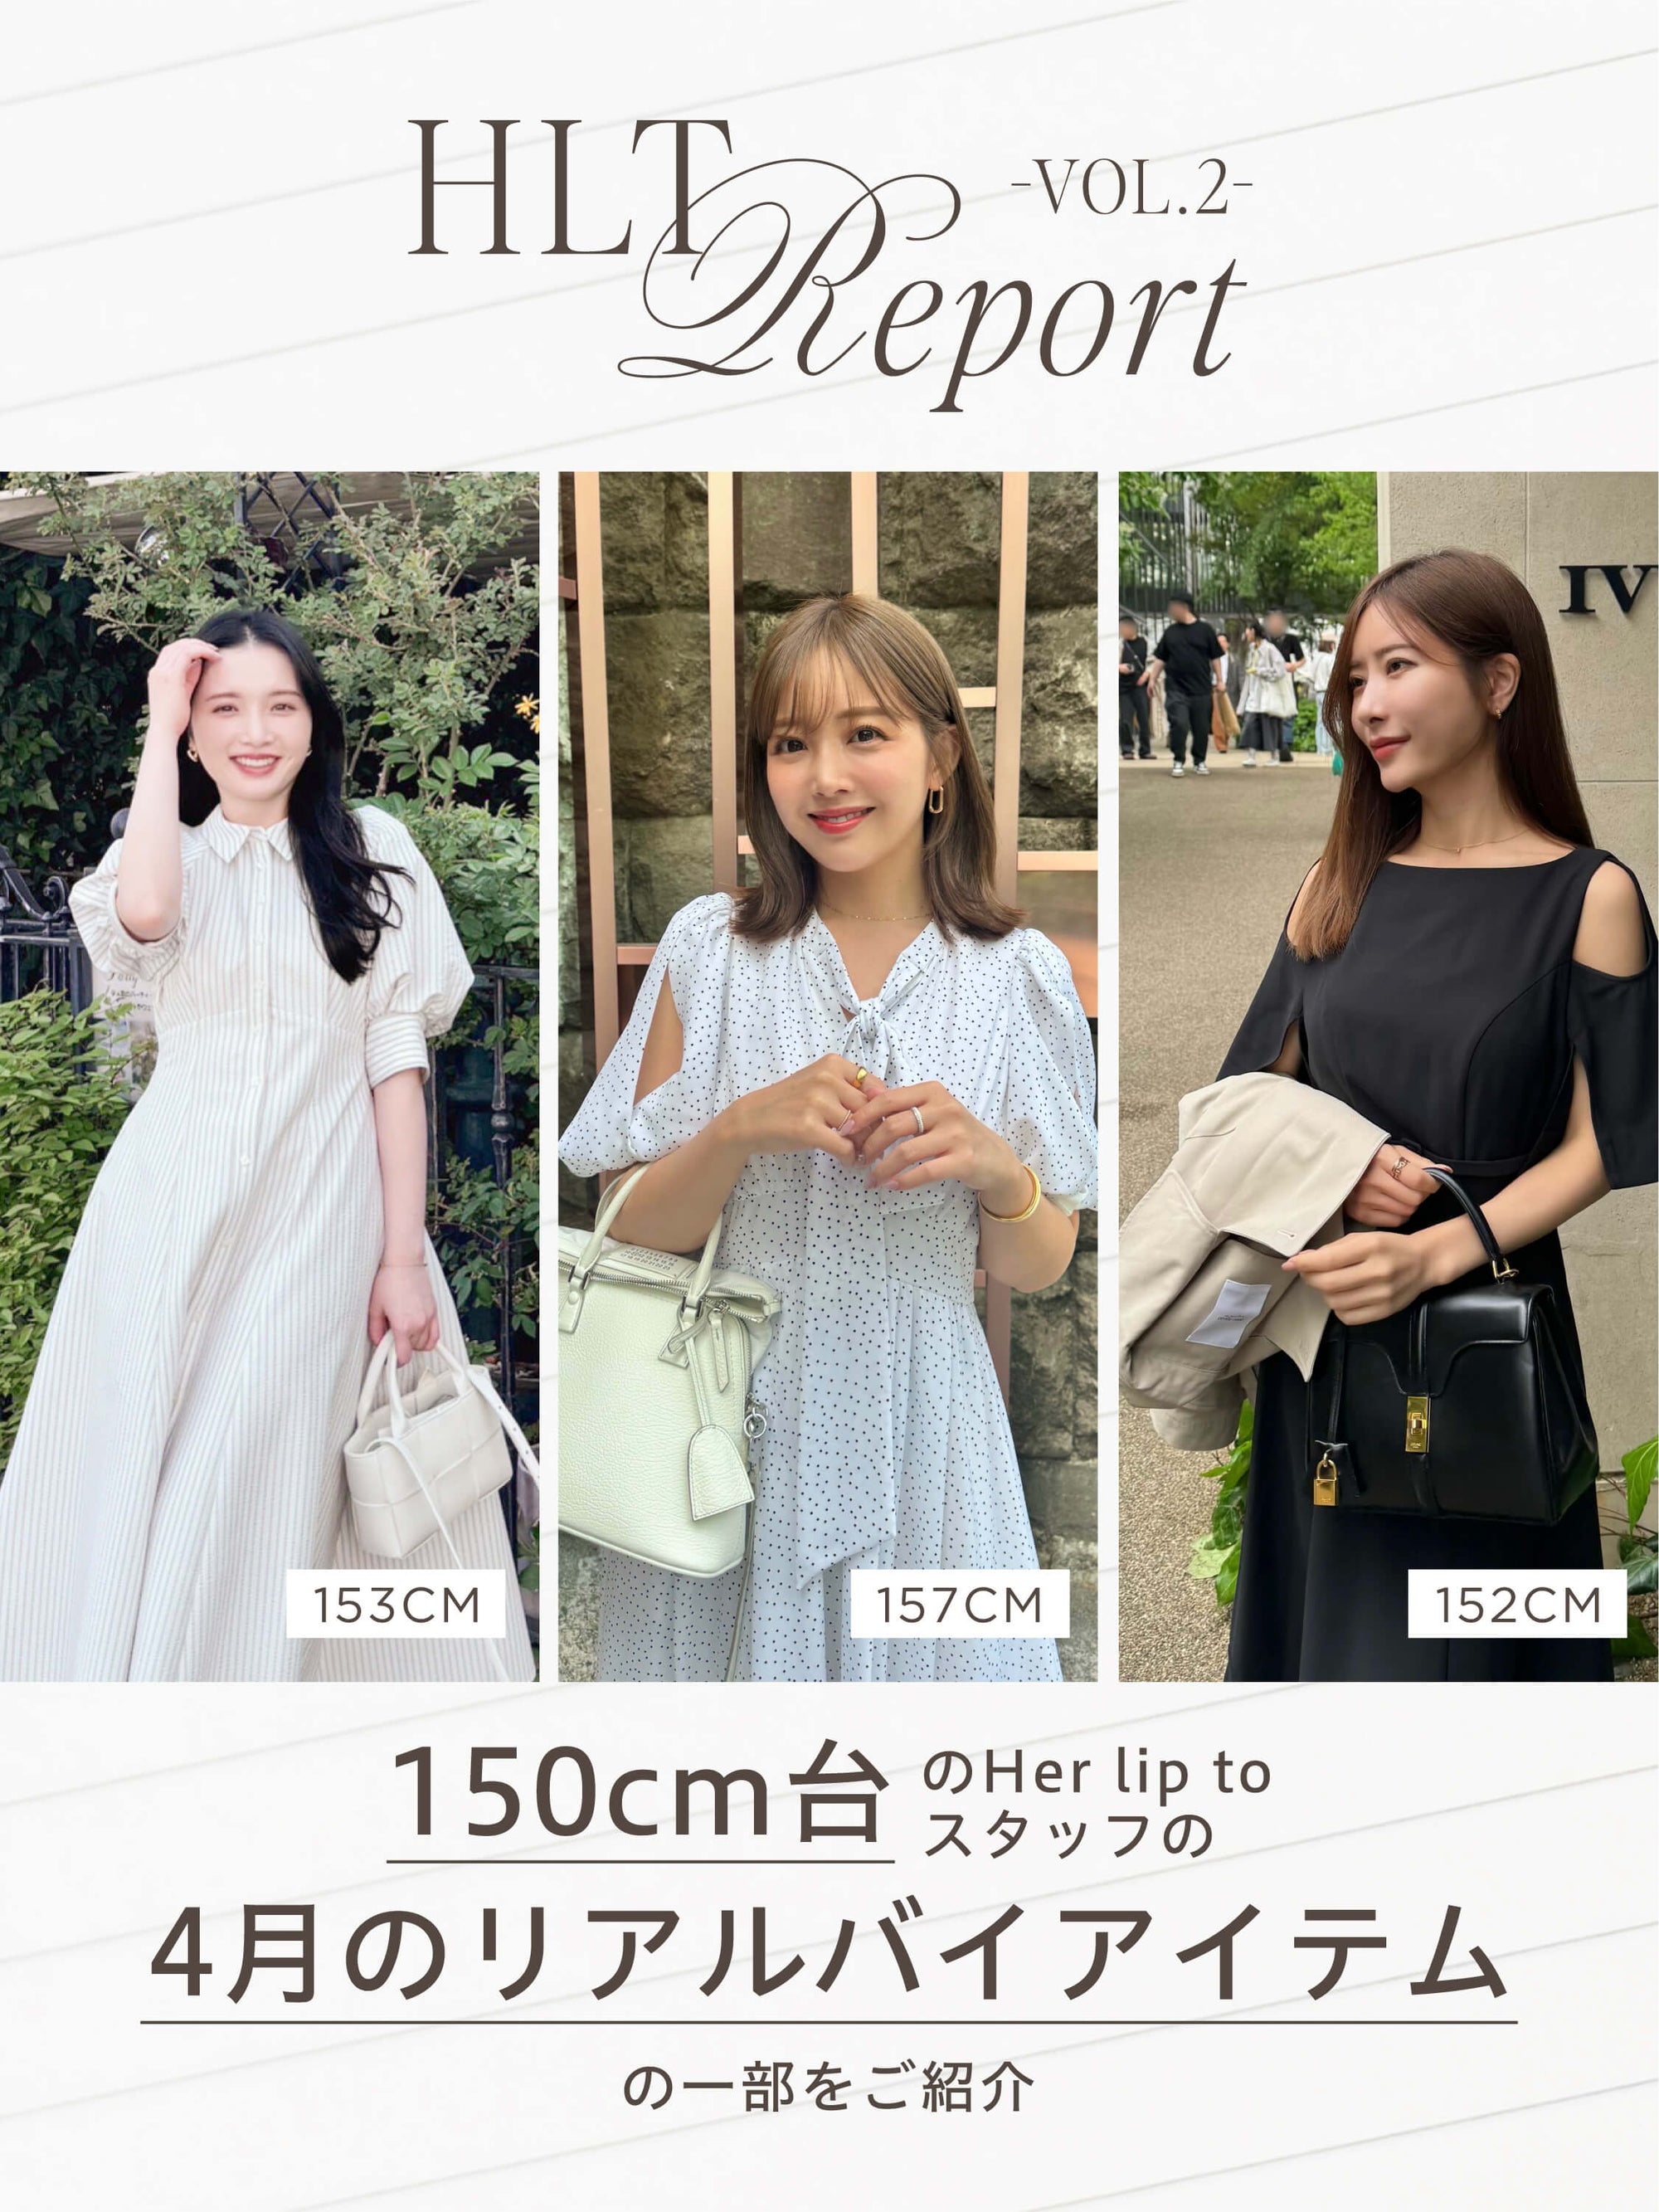 【HLT REPORT VOL.2】Her lip to STAFF’S REAL BUY ITEMS